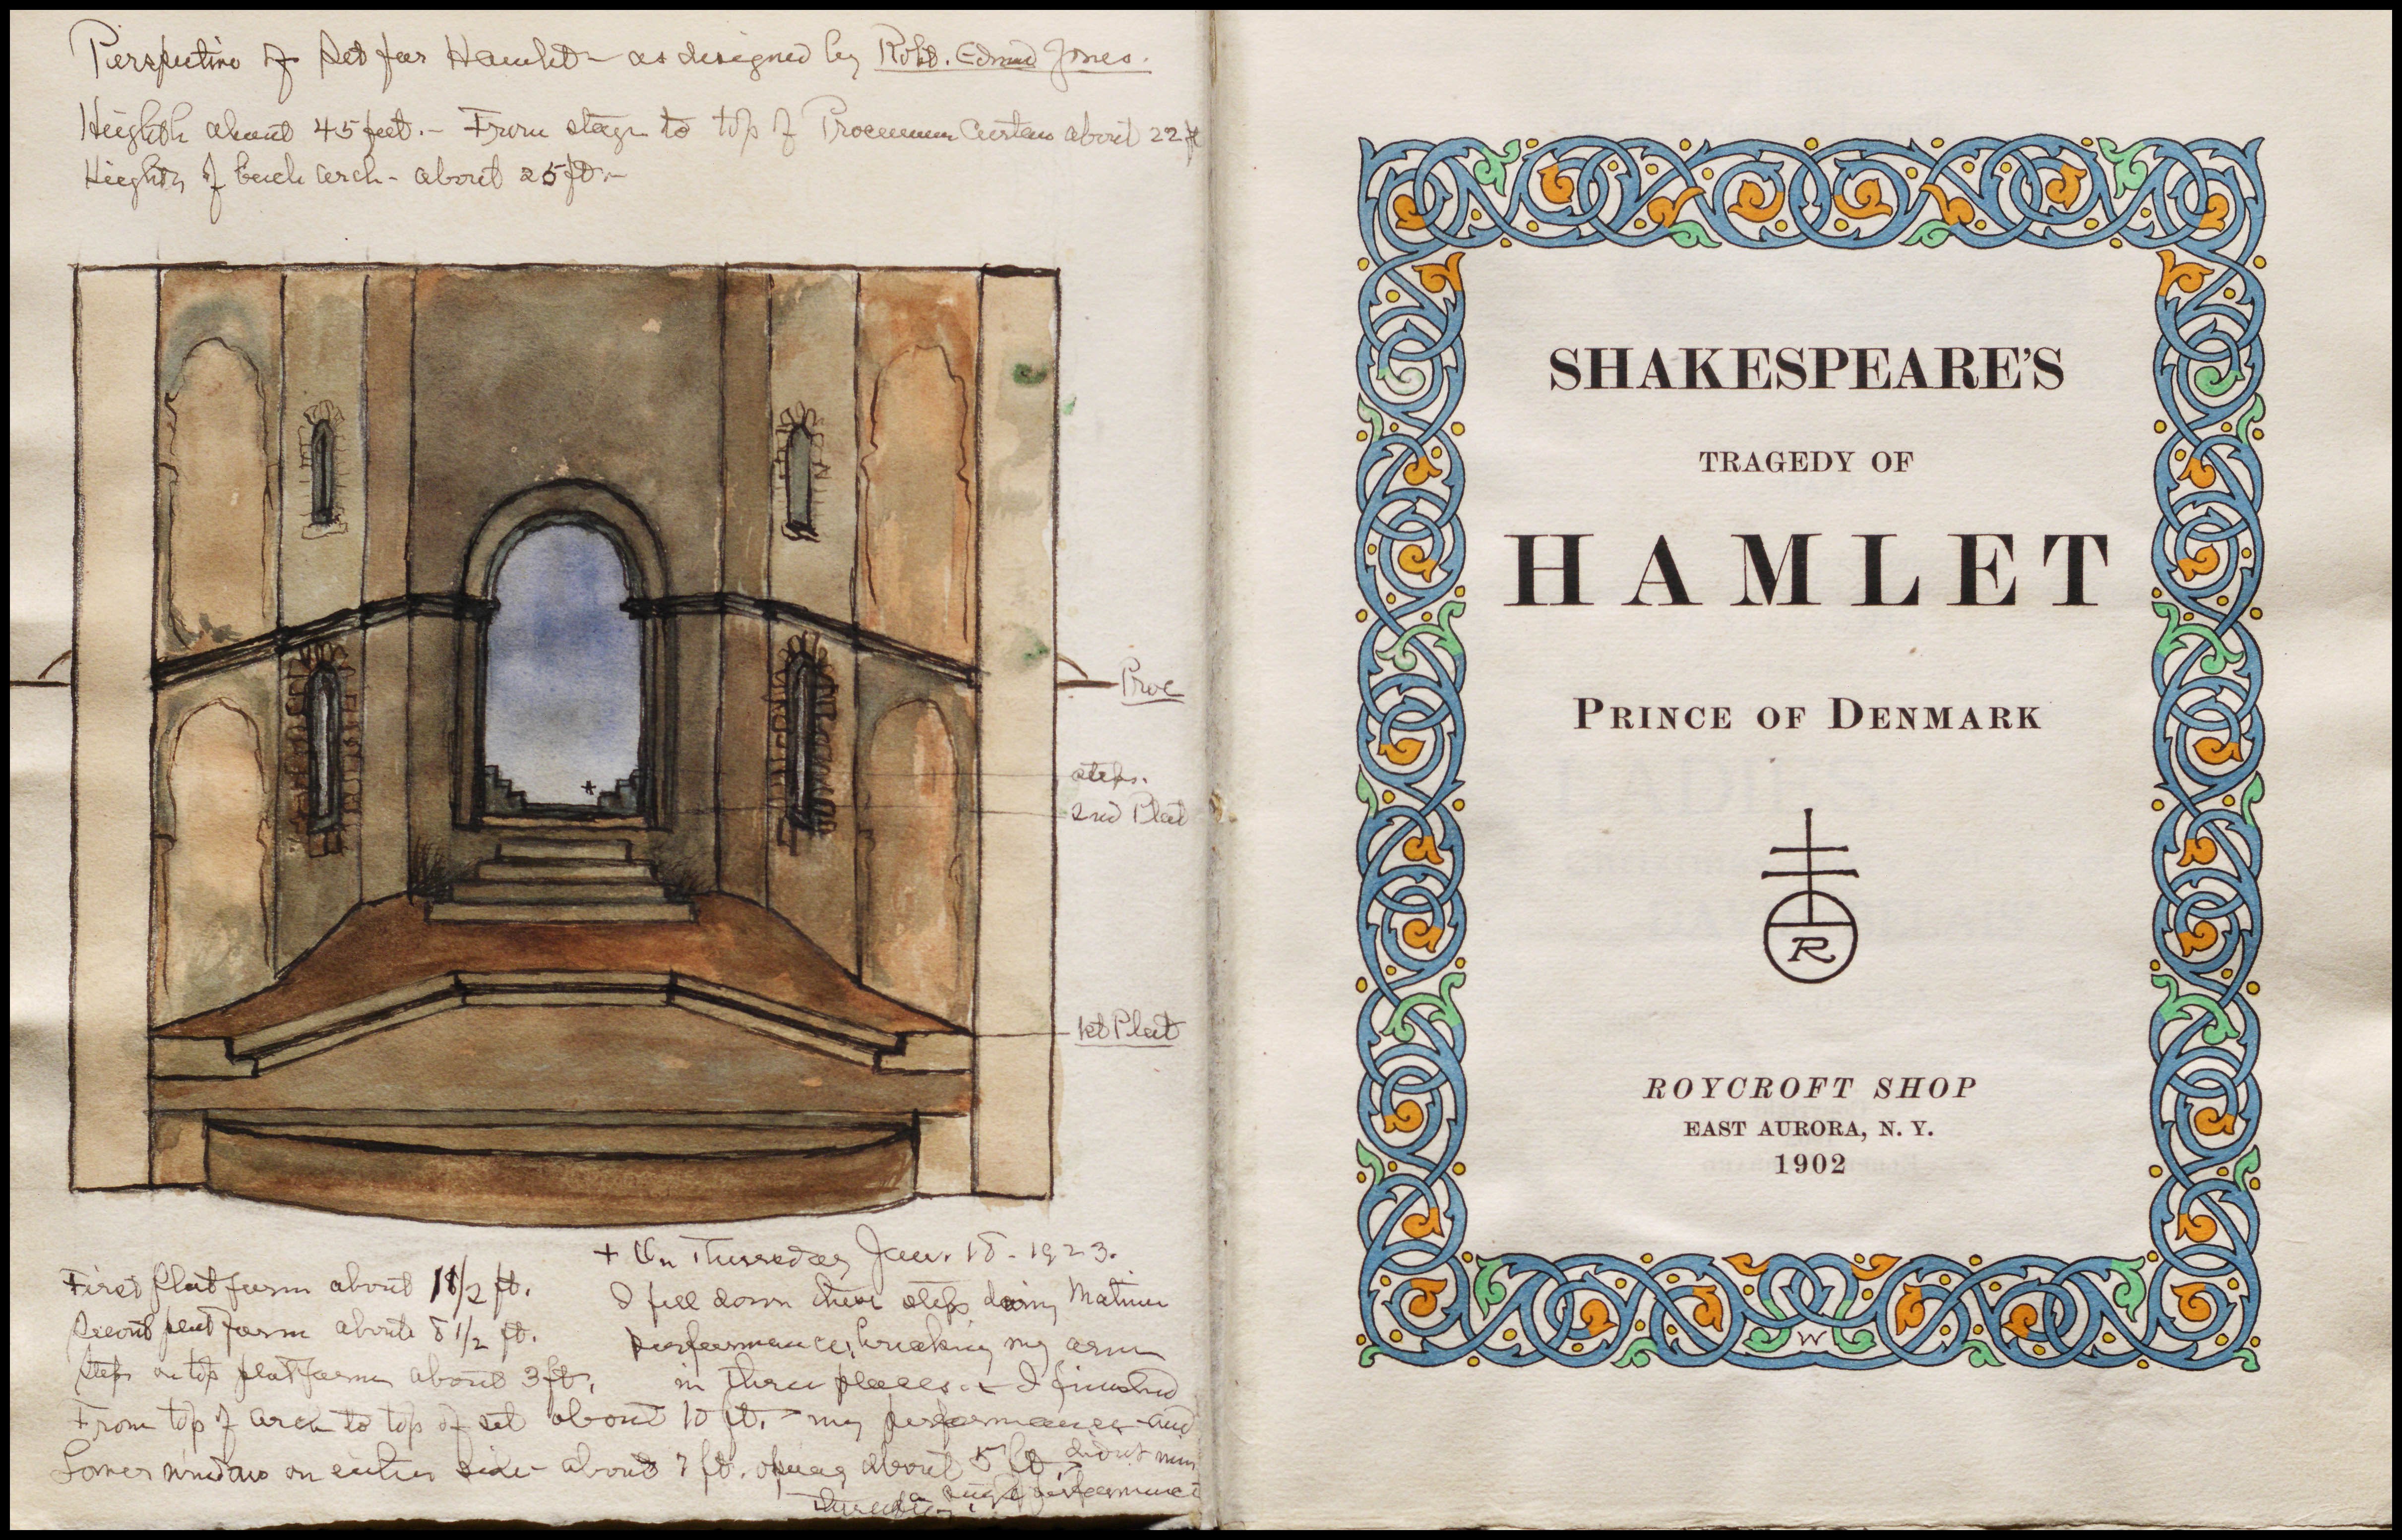 John Barrymore's prompt book from Hamlet